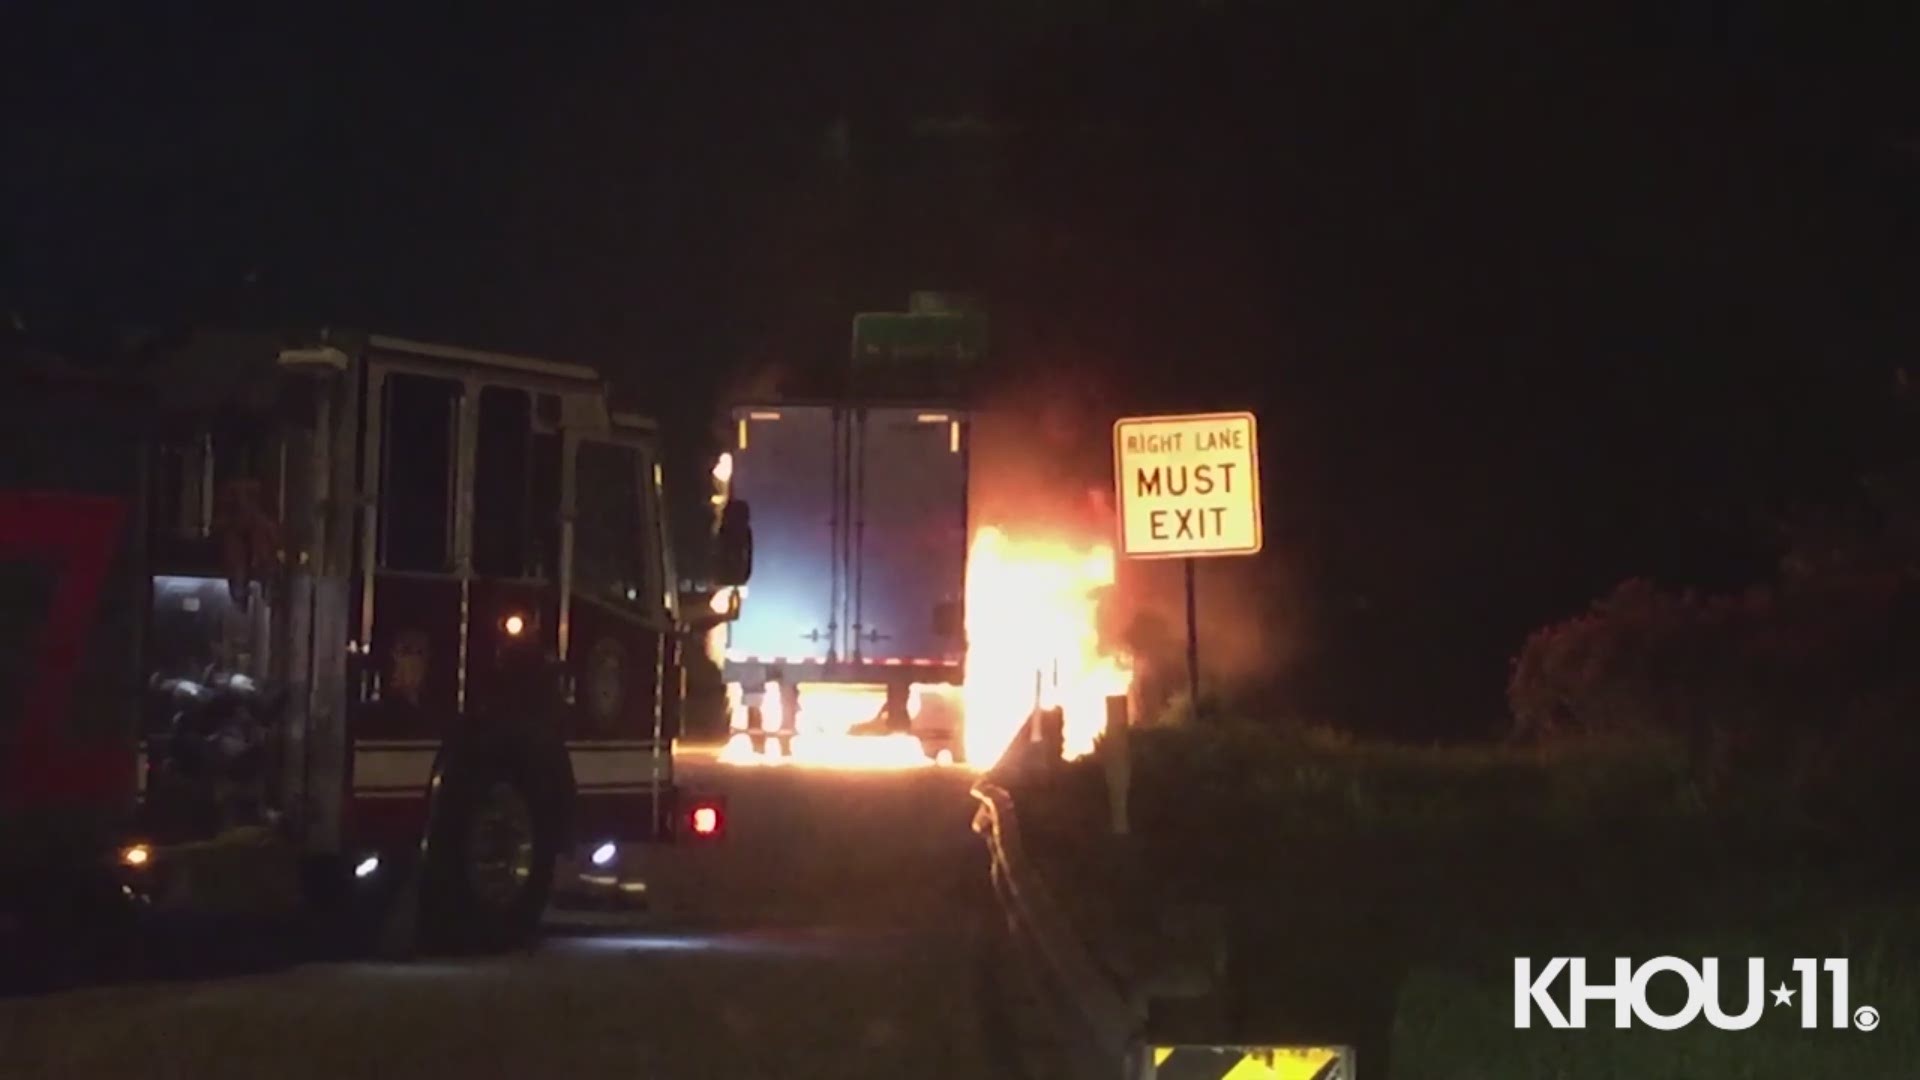 Houston firefighters responded to a big rig fire on the North Loop early Monday morning. This happened just before 2 a.m. near the Main exit in the westbound lanes.